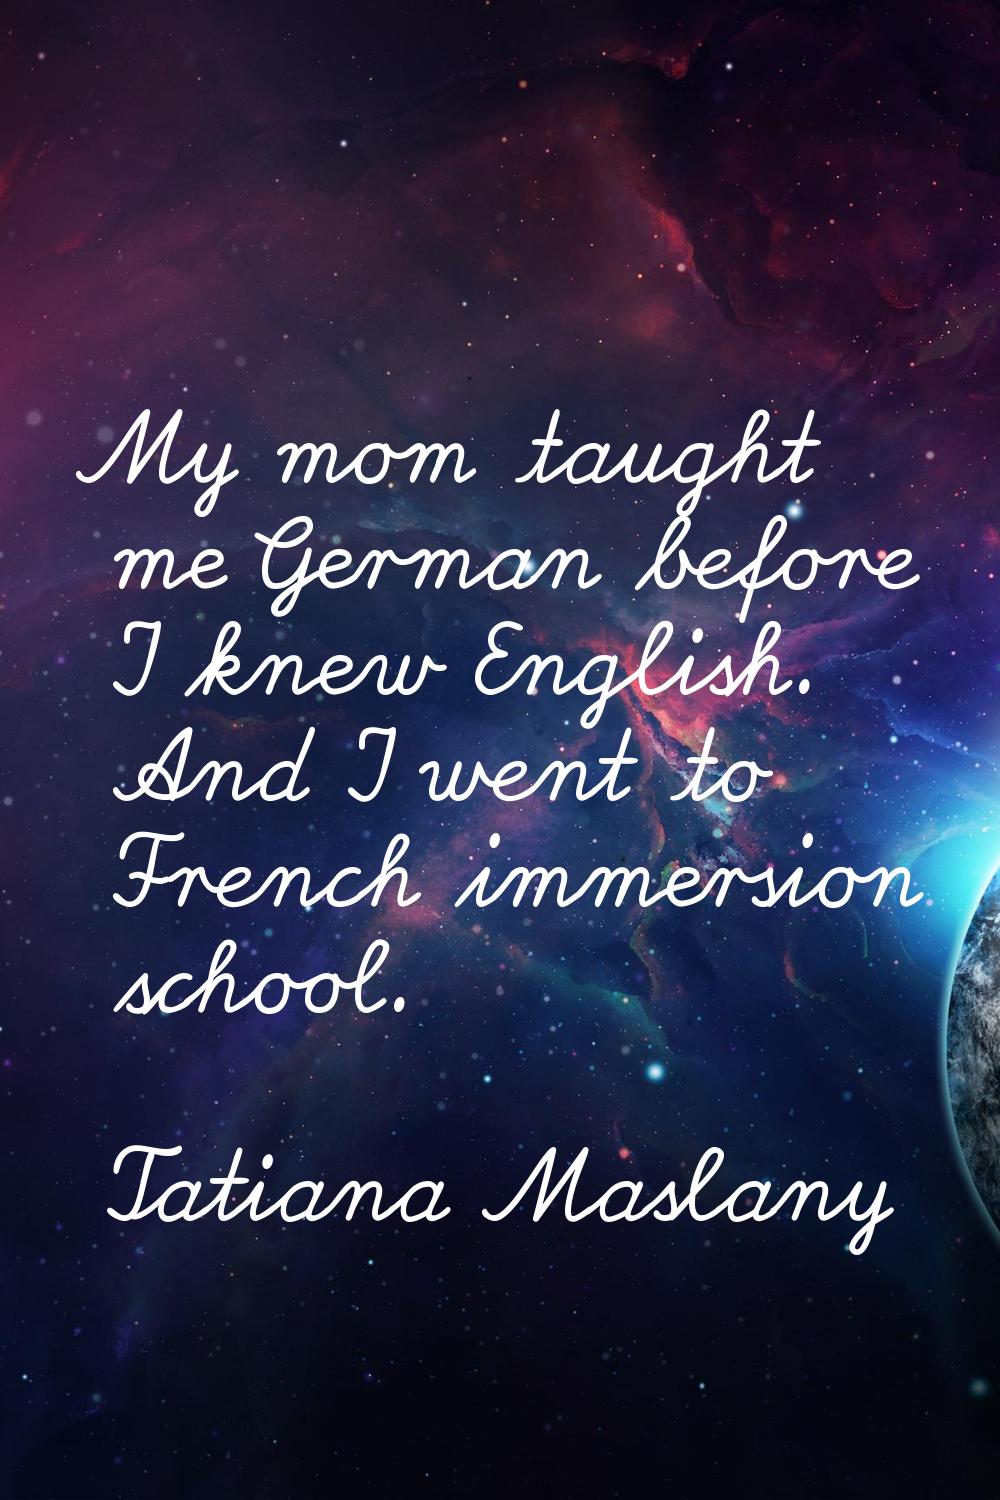 My mom taught me German before I knew English. And I went to French immersion school.